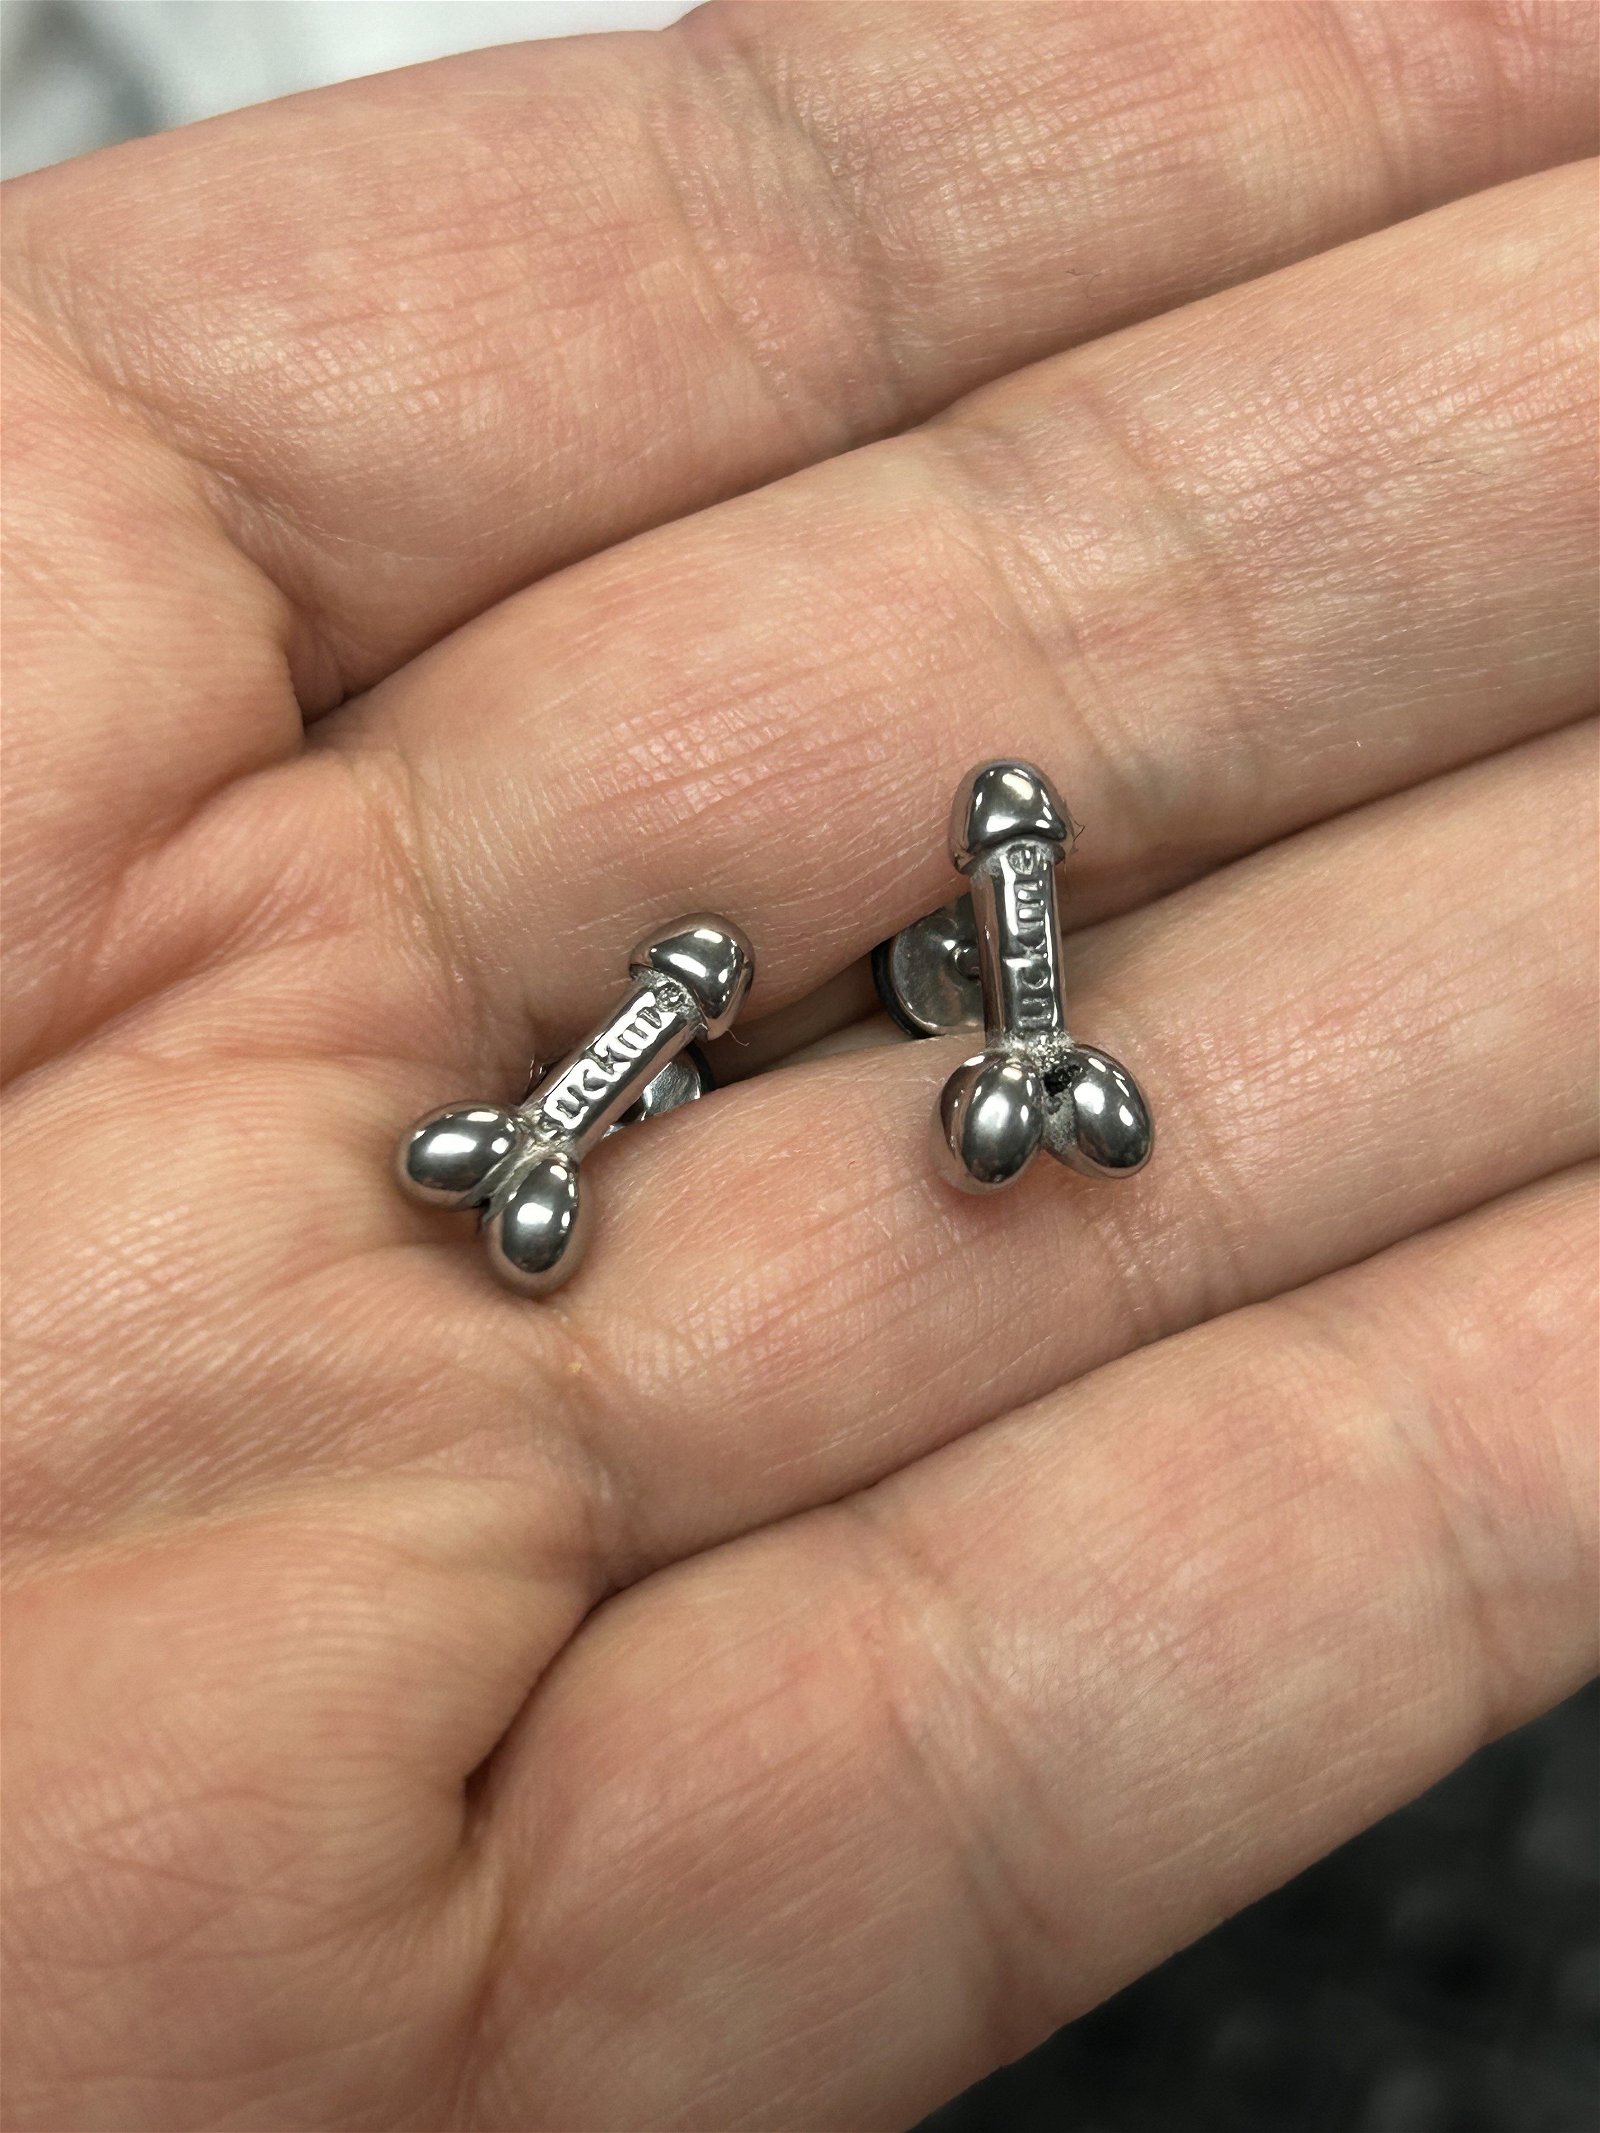 Photo by DirtyDaddyFunStuff with the username @DirtyDaddyPorn, who is a verified user,  February 15, 2024 at 10:32 PM and the text says 'https://whozitzandwhatzitz.com/products/suck-me-penis-earrings
Our fun little Gay Owned Shop has #penis #suckme #earrings  . Gold Steel, Black Steel or Silver Steel.  #cock #cocklovers #oral'